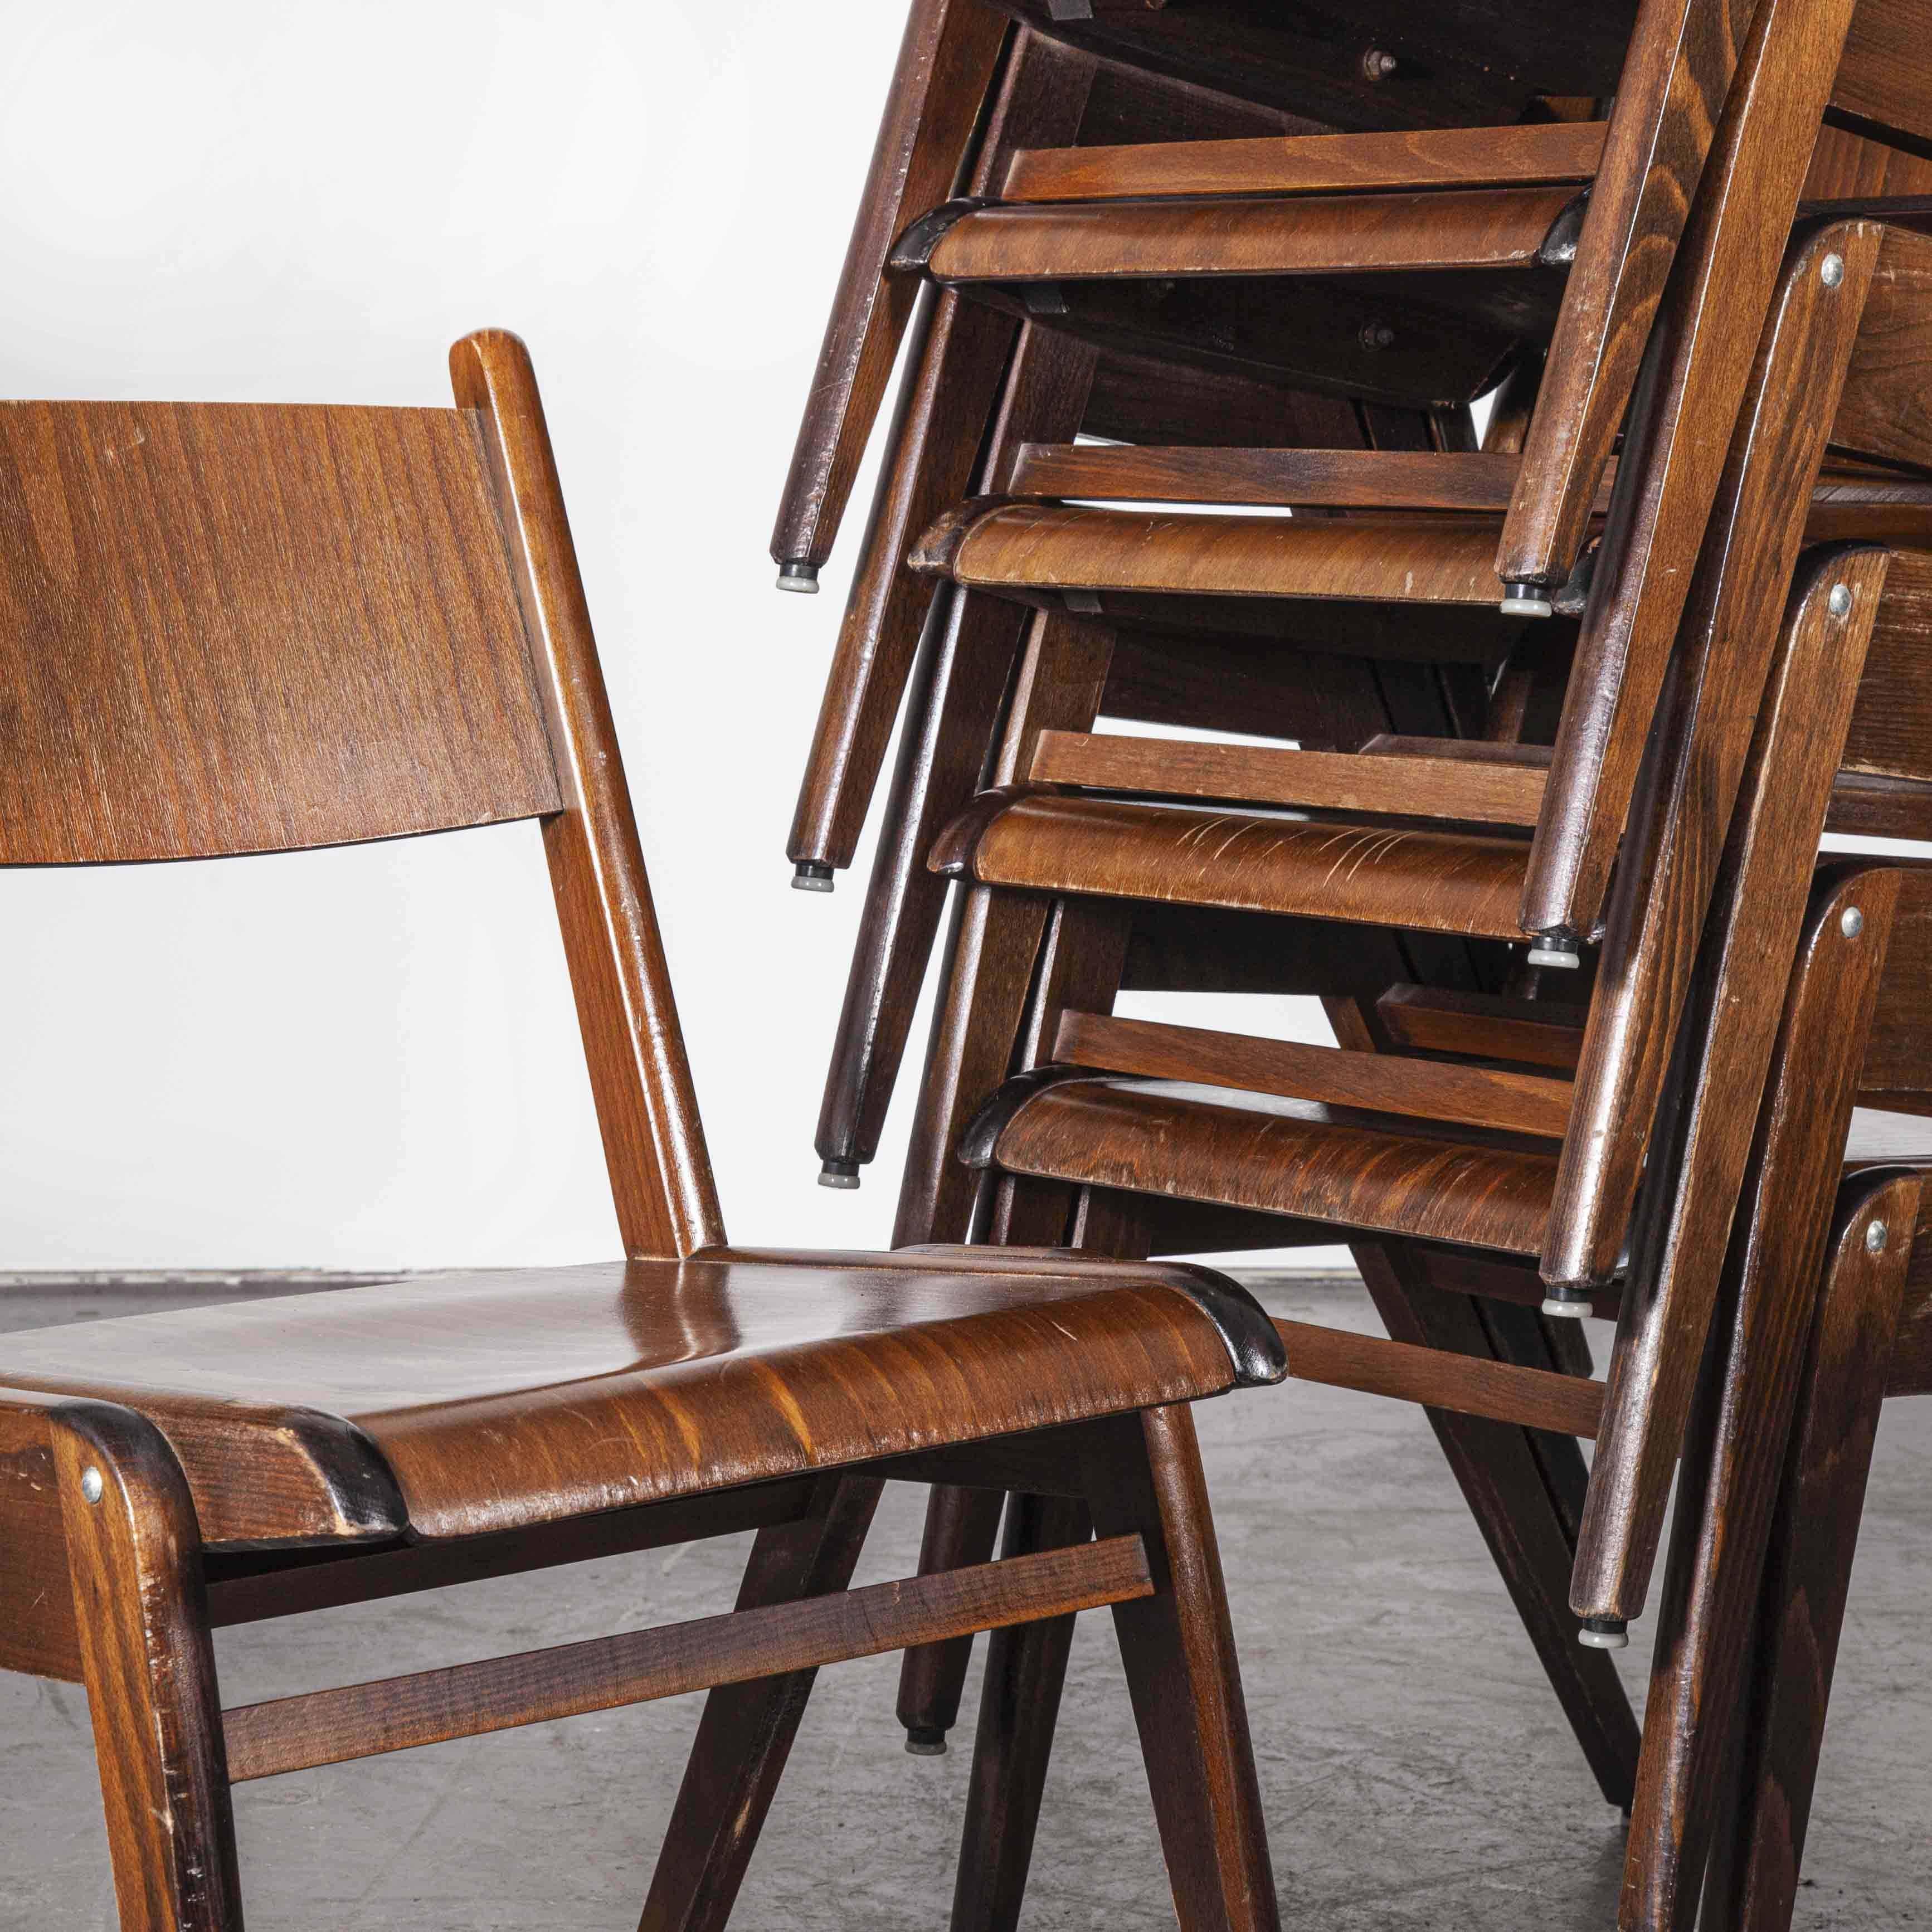 1950s Casala midcentury walnut stacking dining chair – set of eight.
1950s Casala walnut stacking dining chair – set of eight. Casala is one of Germanys best known furniture producers still producing to this day. In our view the 1950s-1960s was